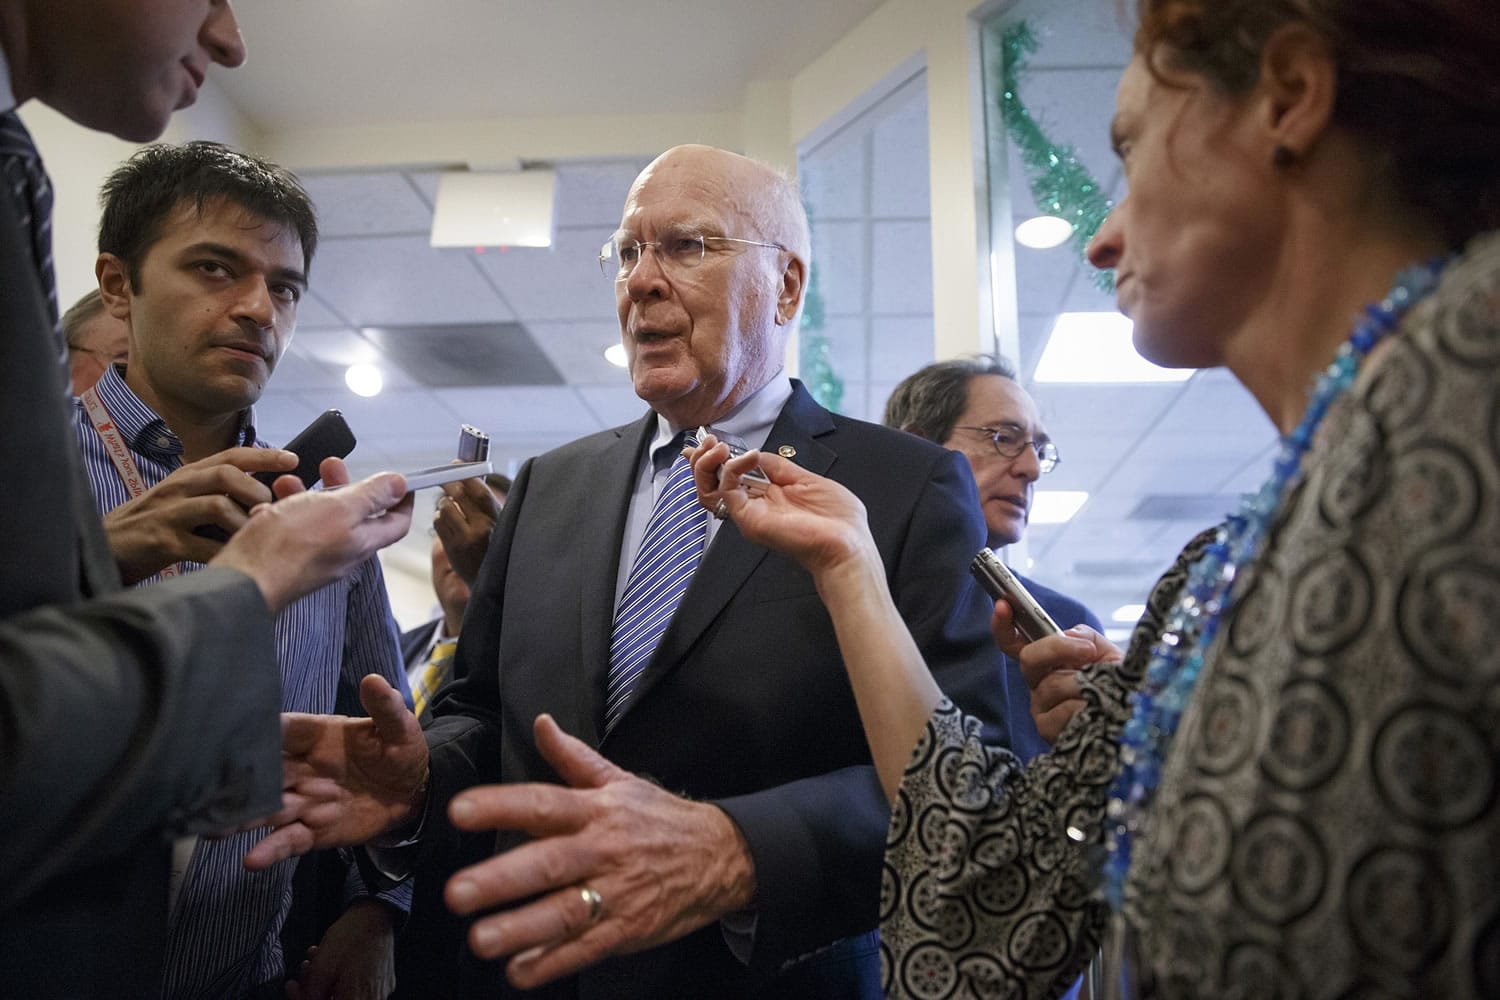 Sen. Patrick Leahy, D-Vt. speaks to reporters Dec. 17 on Capitol Hill in Washington.